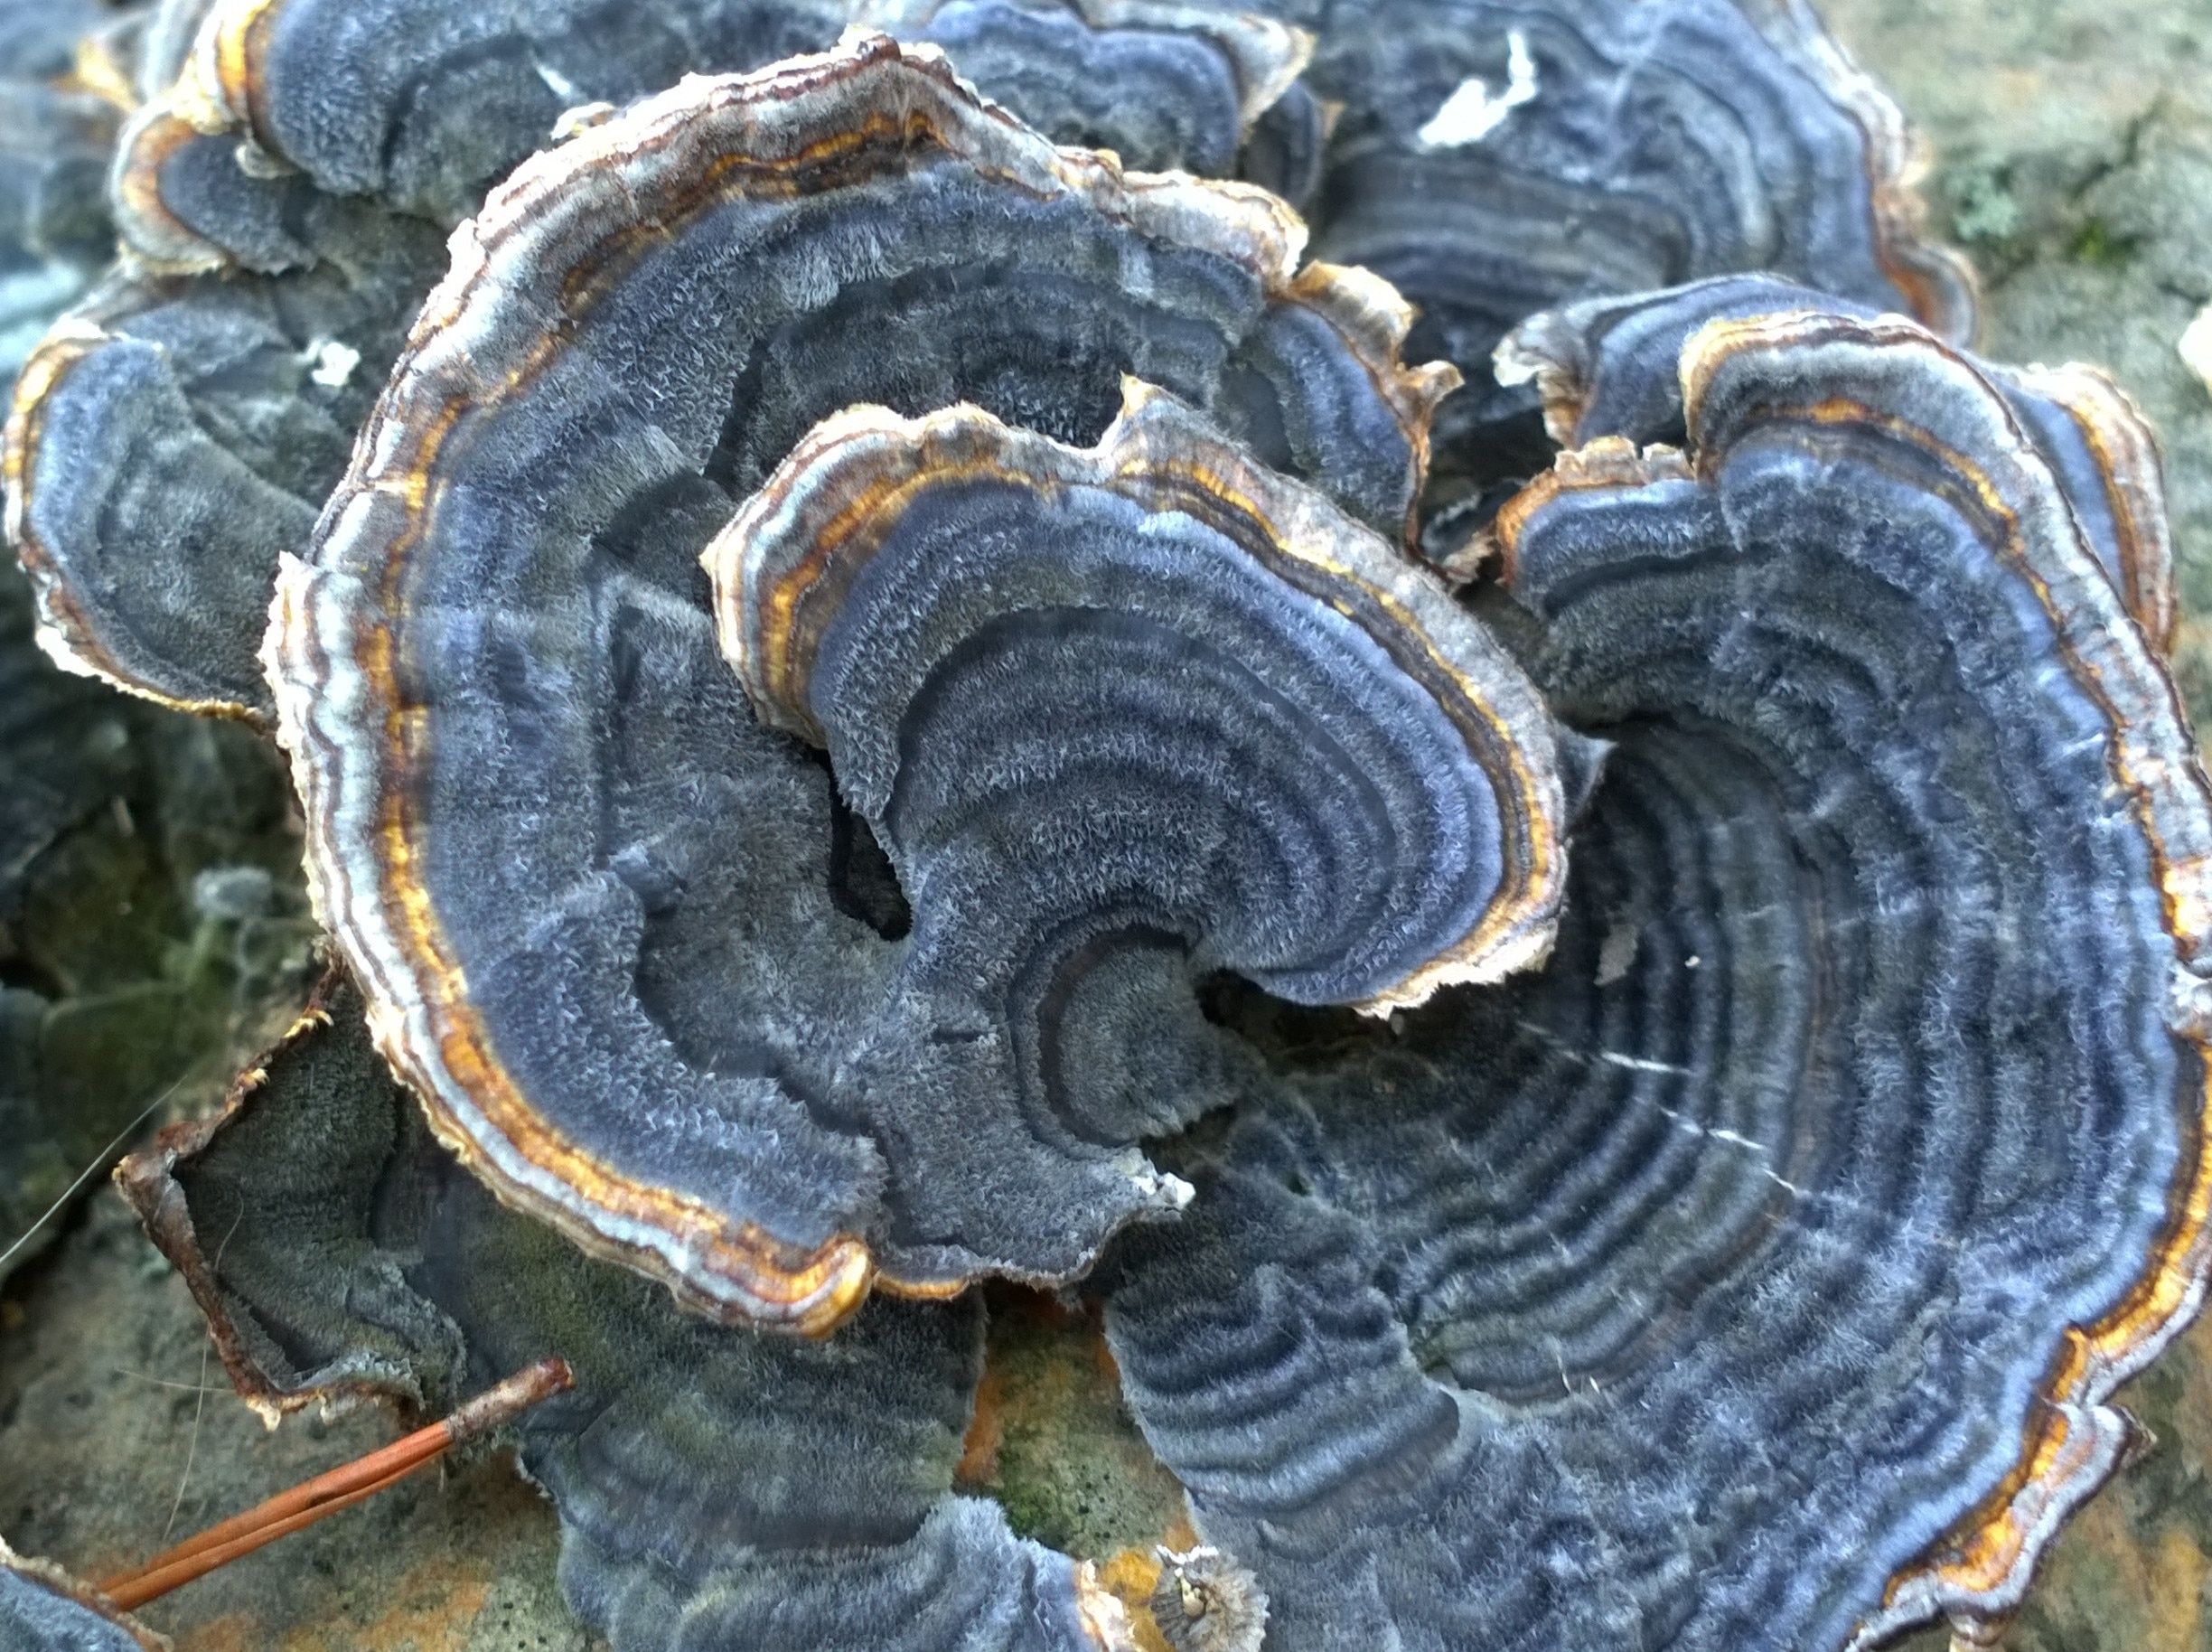 Turkey tails (Trametes versicolor) taking on a bluish hue on the first day of spring.